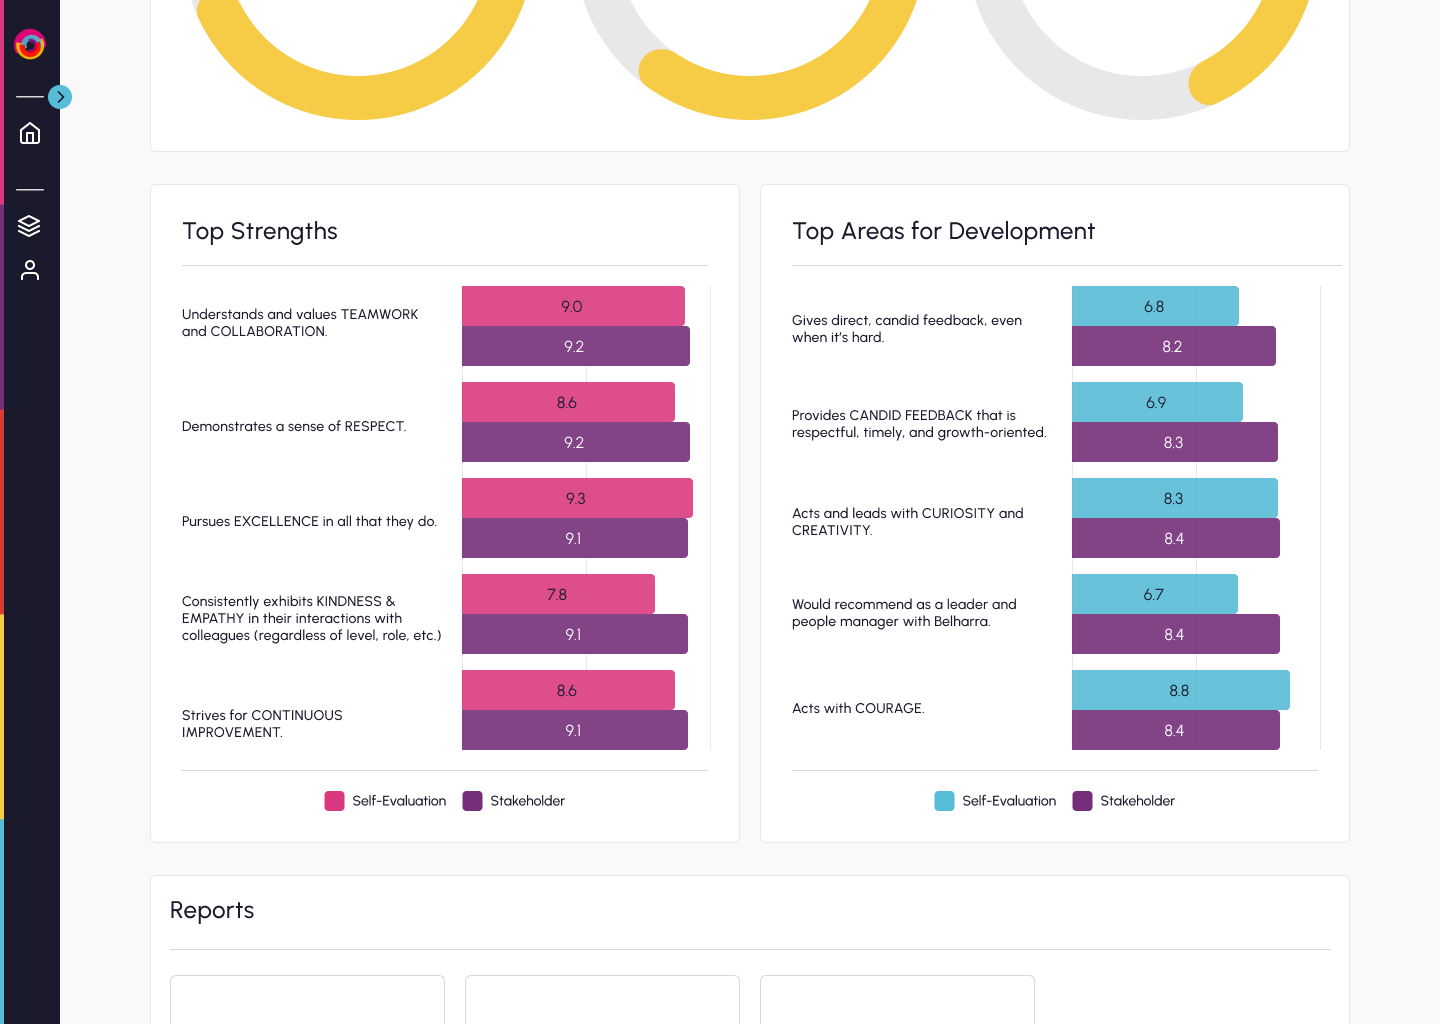 Identify strengths, development areas and trends over time with each assessment and survey